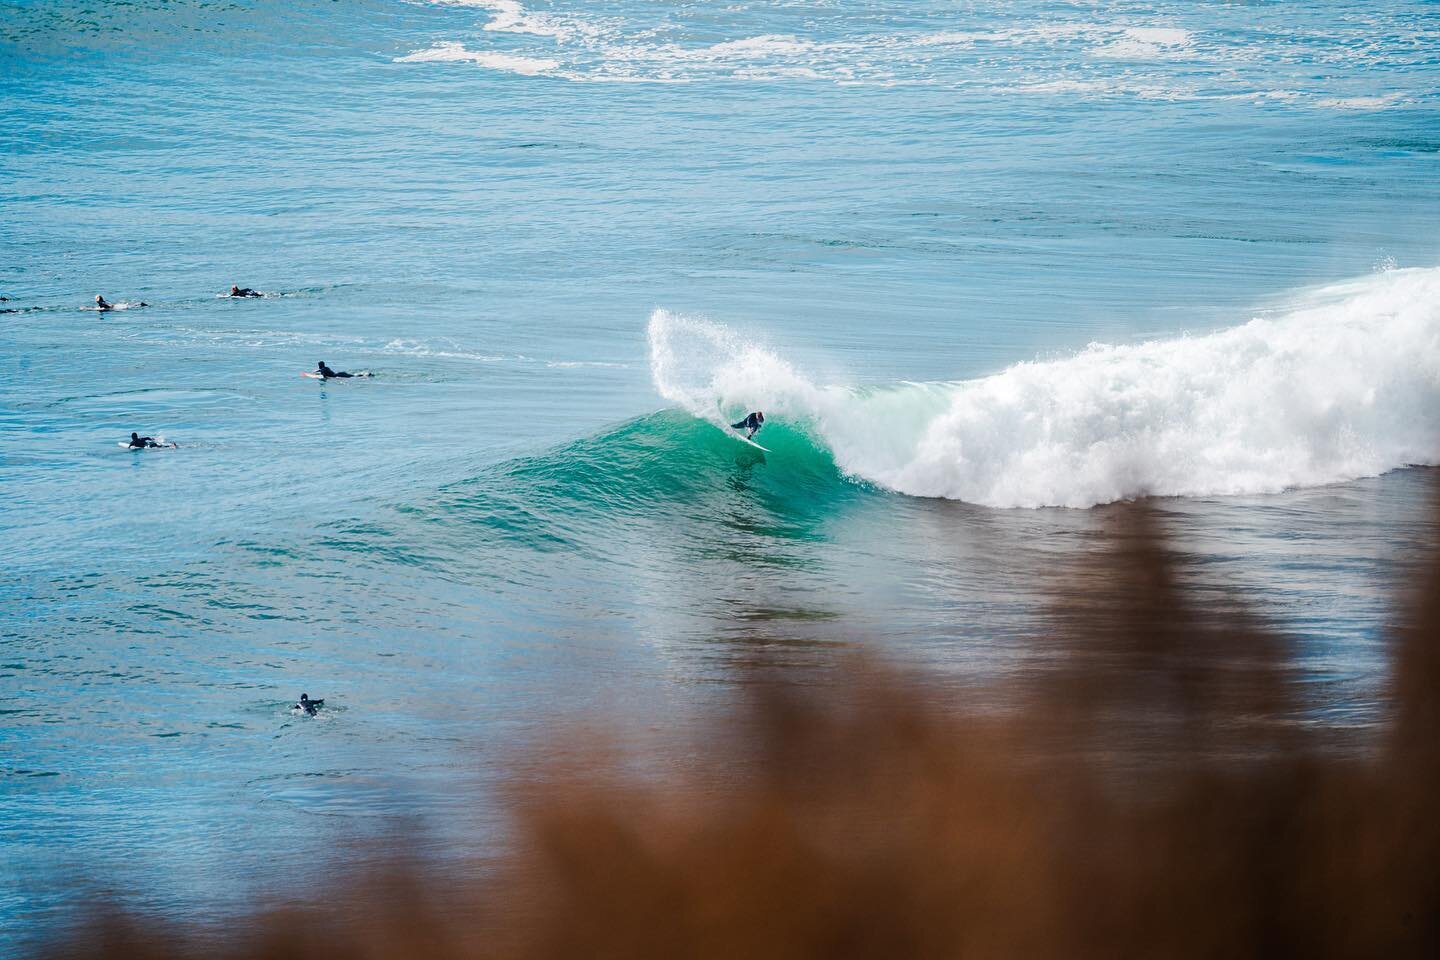 Pretty unreal when the surf is huge and pumping to sit back and watch the locals get after it.

Last month as we drove along the coast of California, we were given a real show of what the ocean can offer. 

Swipe to see one of the bigger set waves co